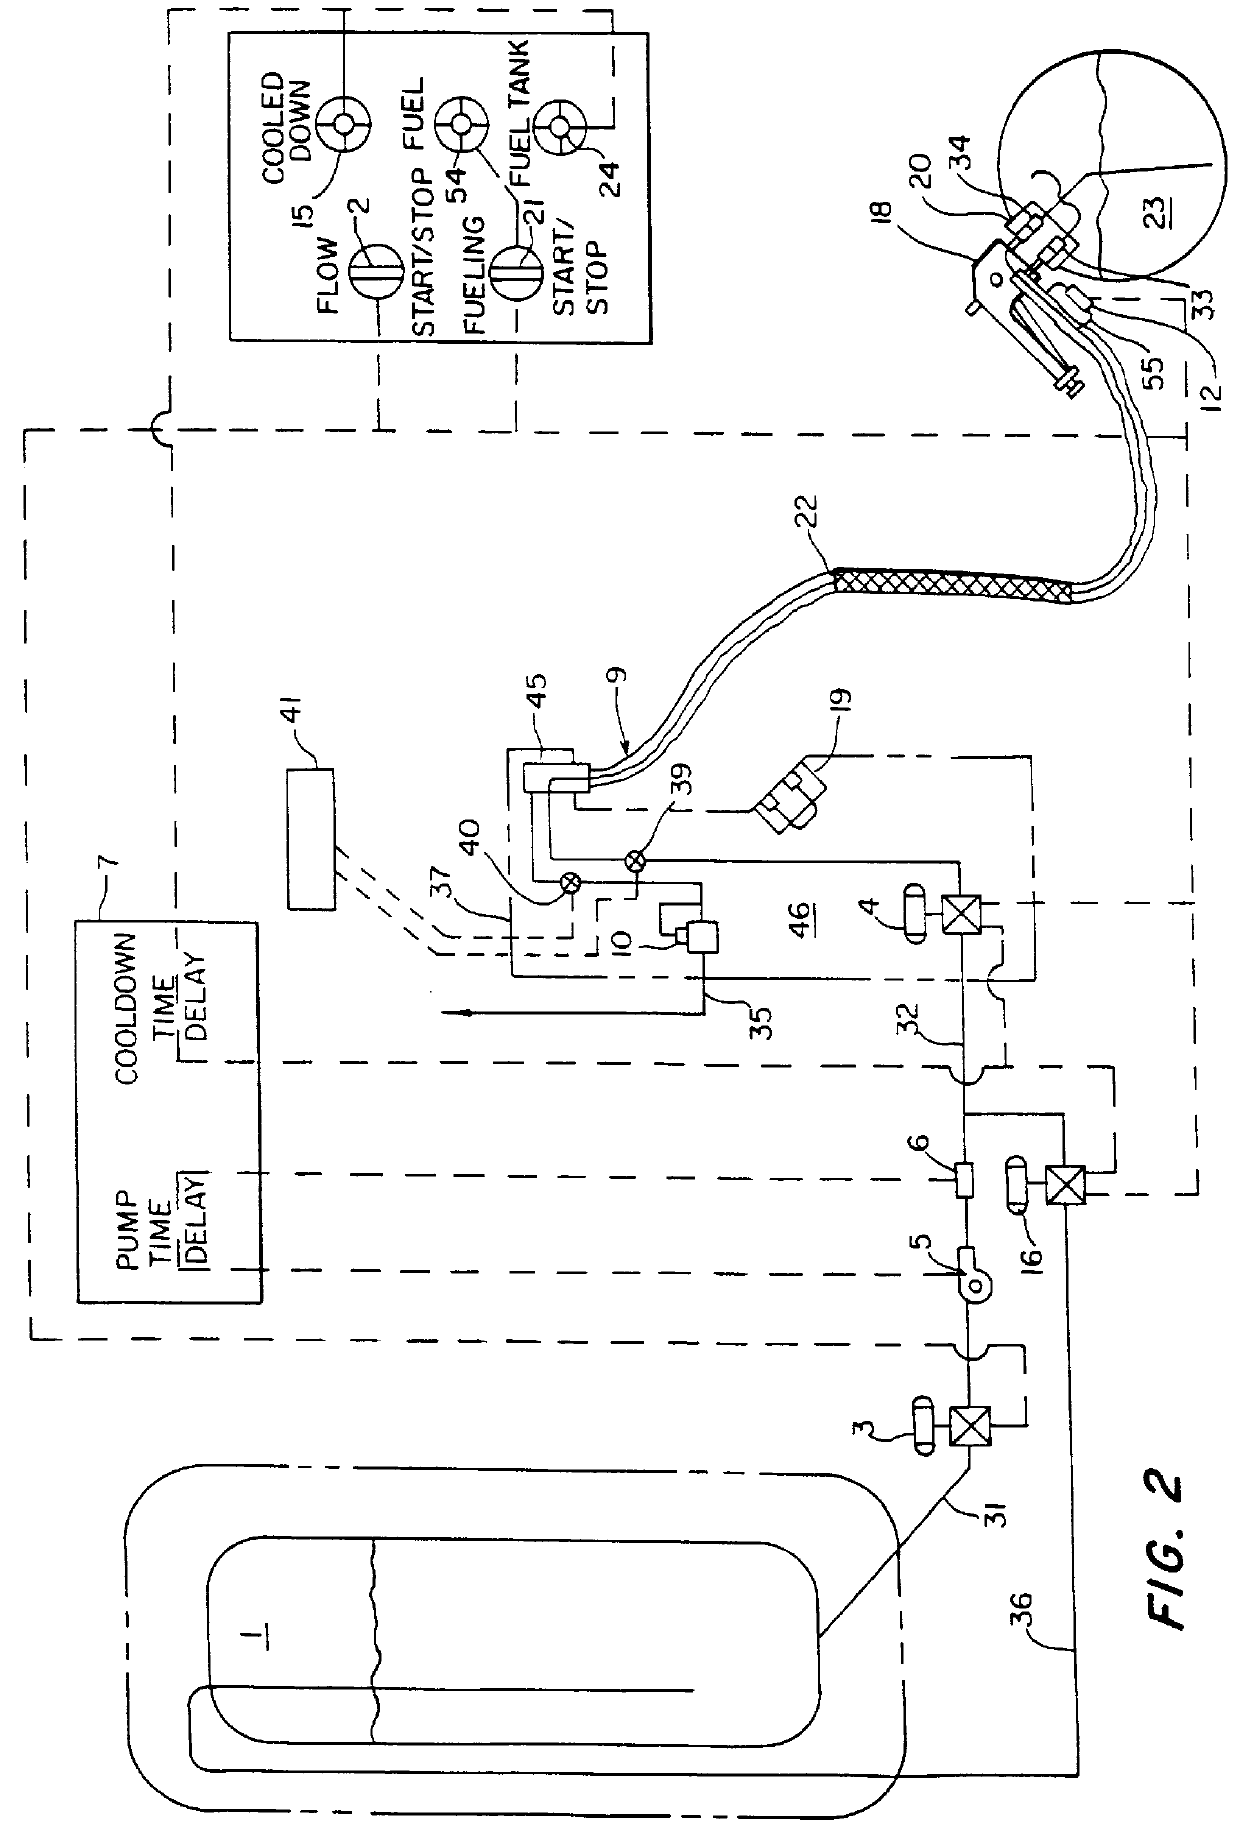 Apparatus and method of metering and transfer of cryogenic liquids